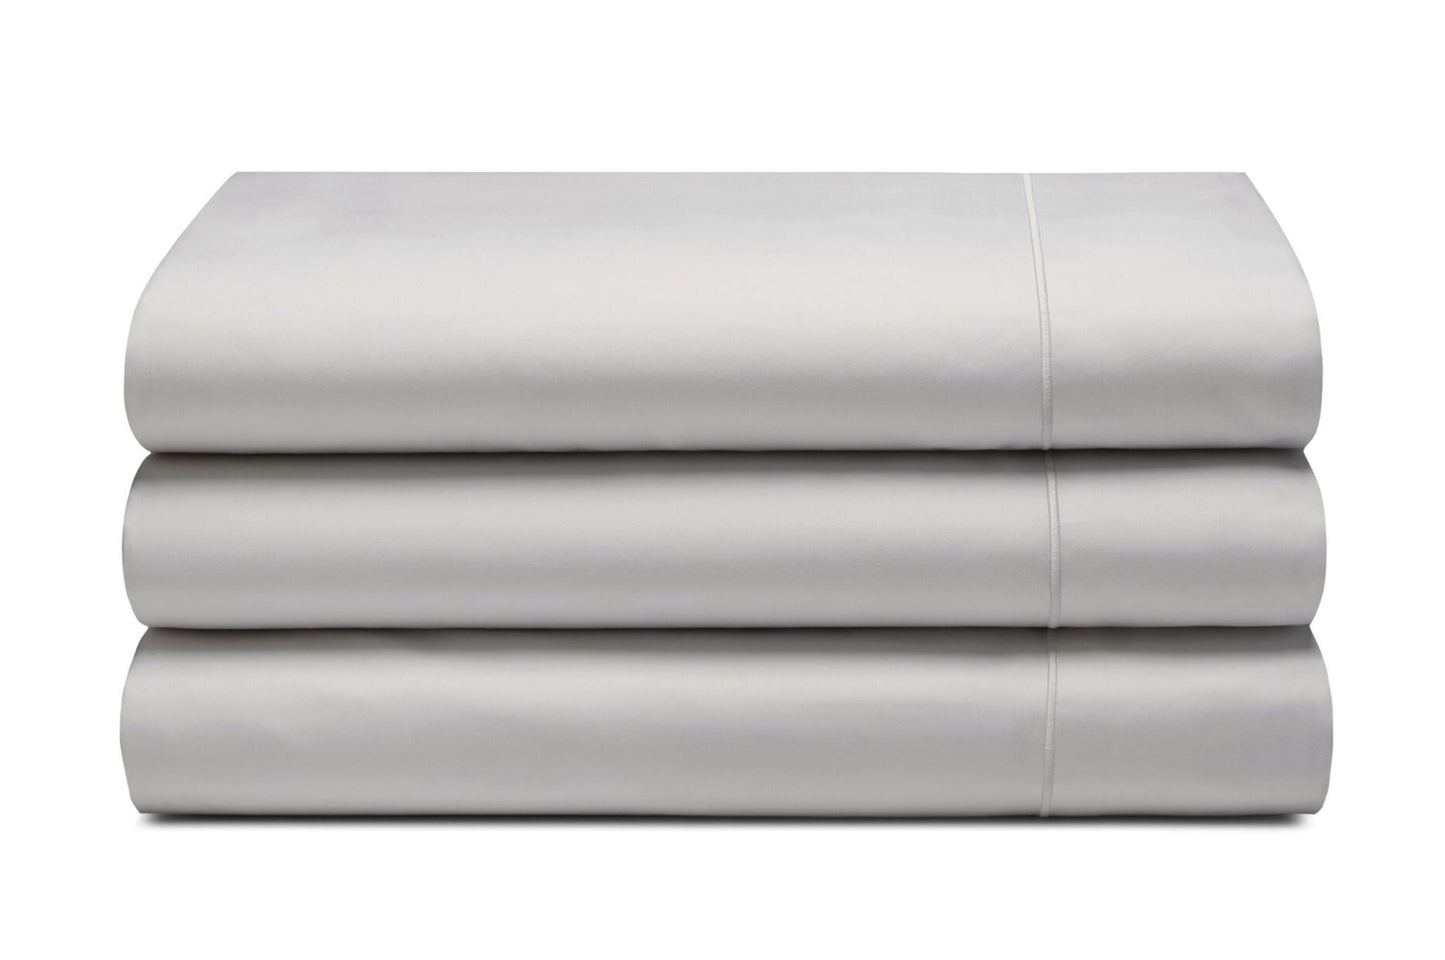 Prestige Range: Egyptian Cotton Sateen 1000 Count fitted sheet - Single bed